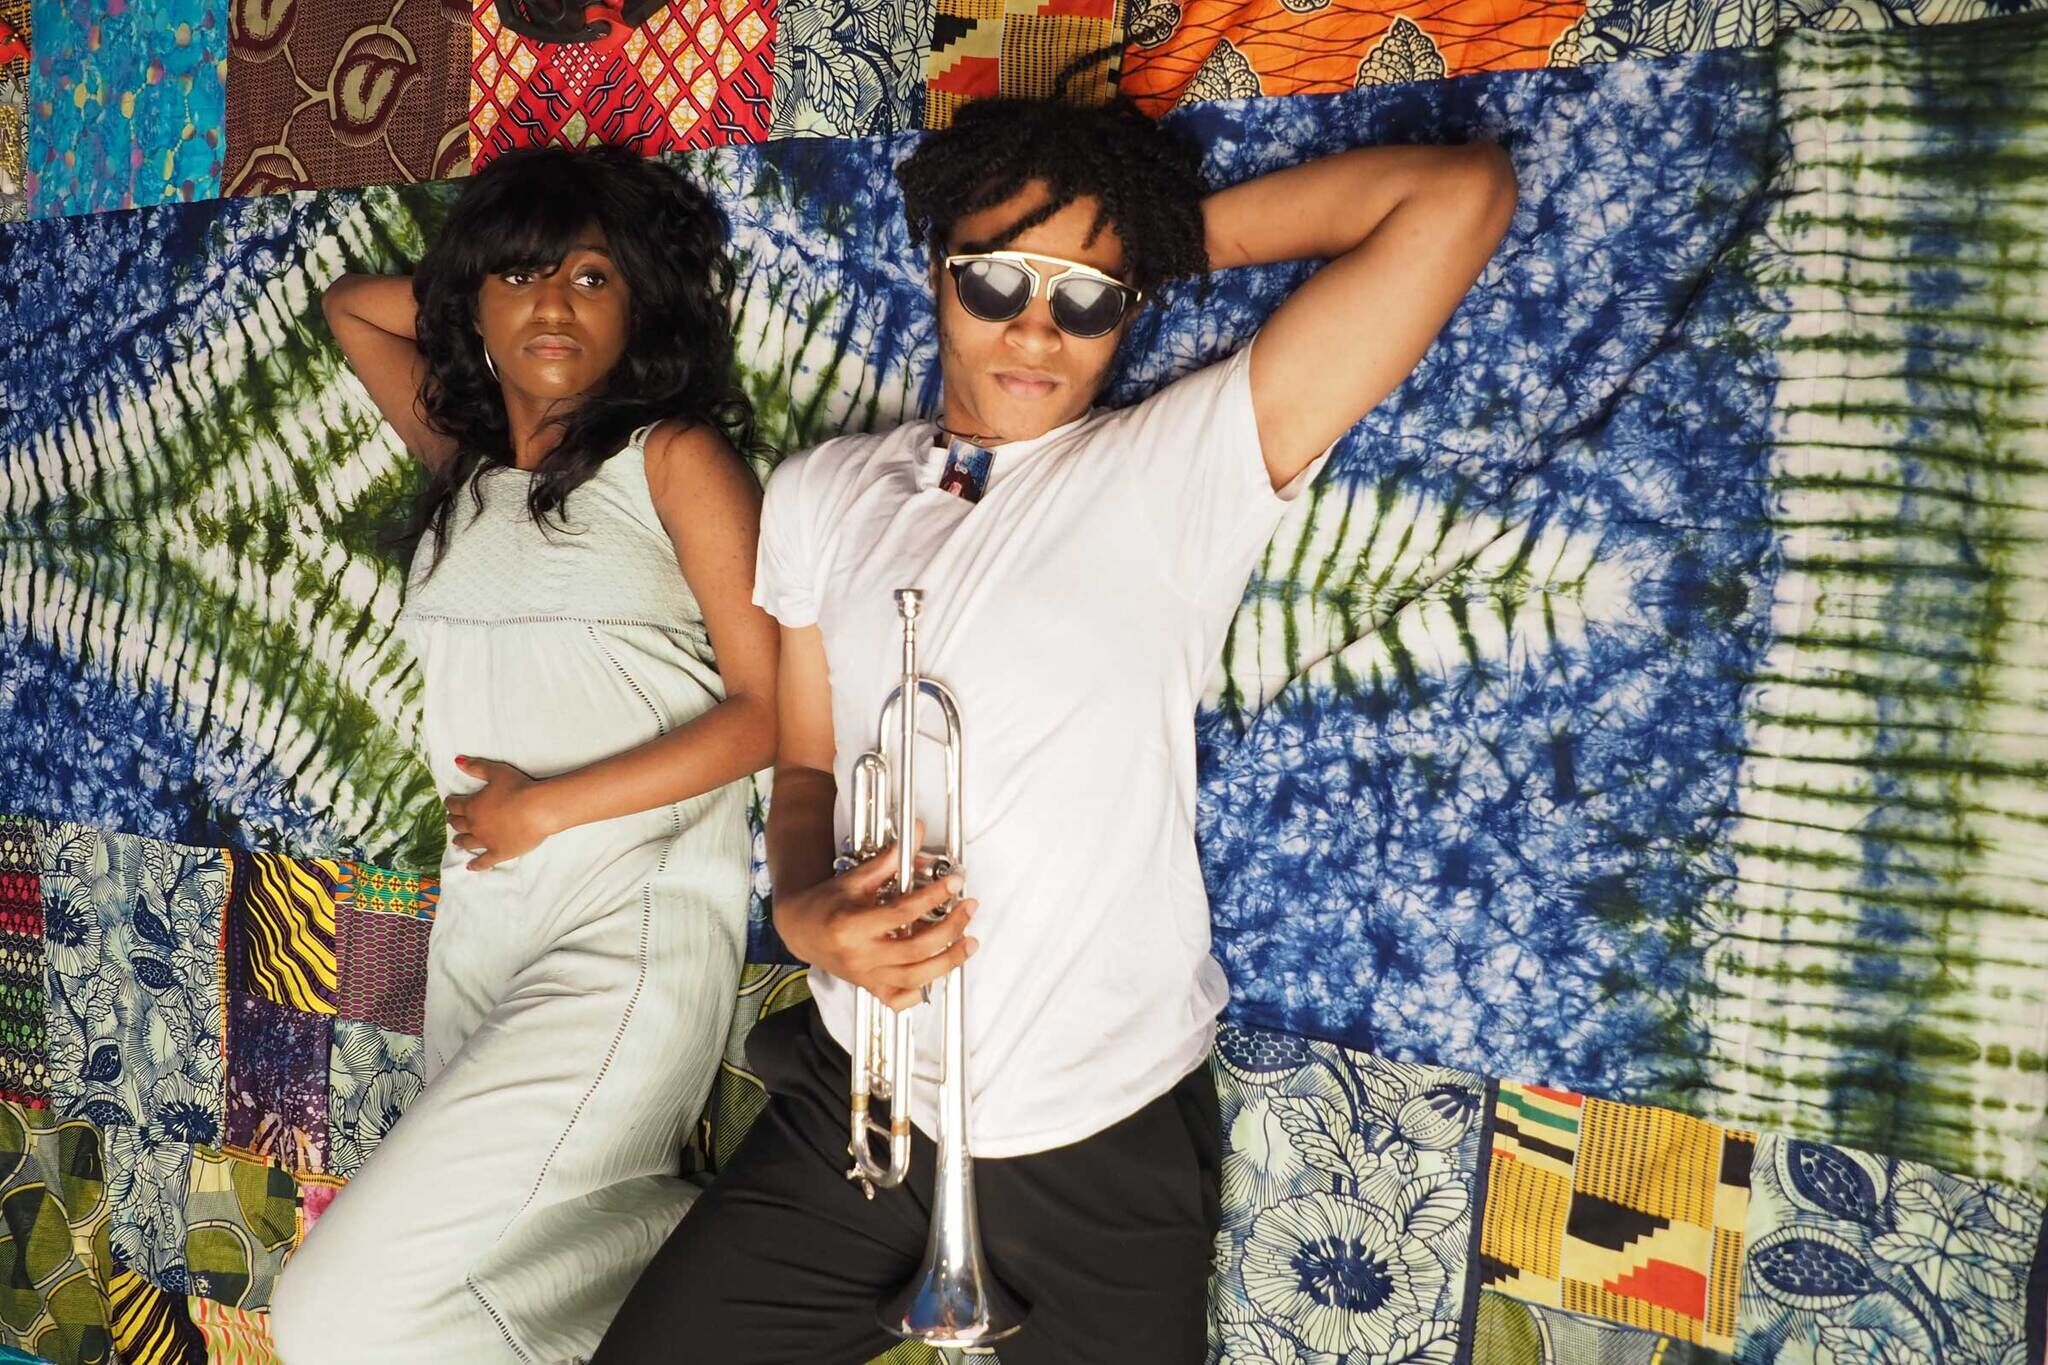 A Black man and woman lay on a multicolored tie-dyed quilted blanket. The man is wearing sunglasses and holds a trumpet.